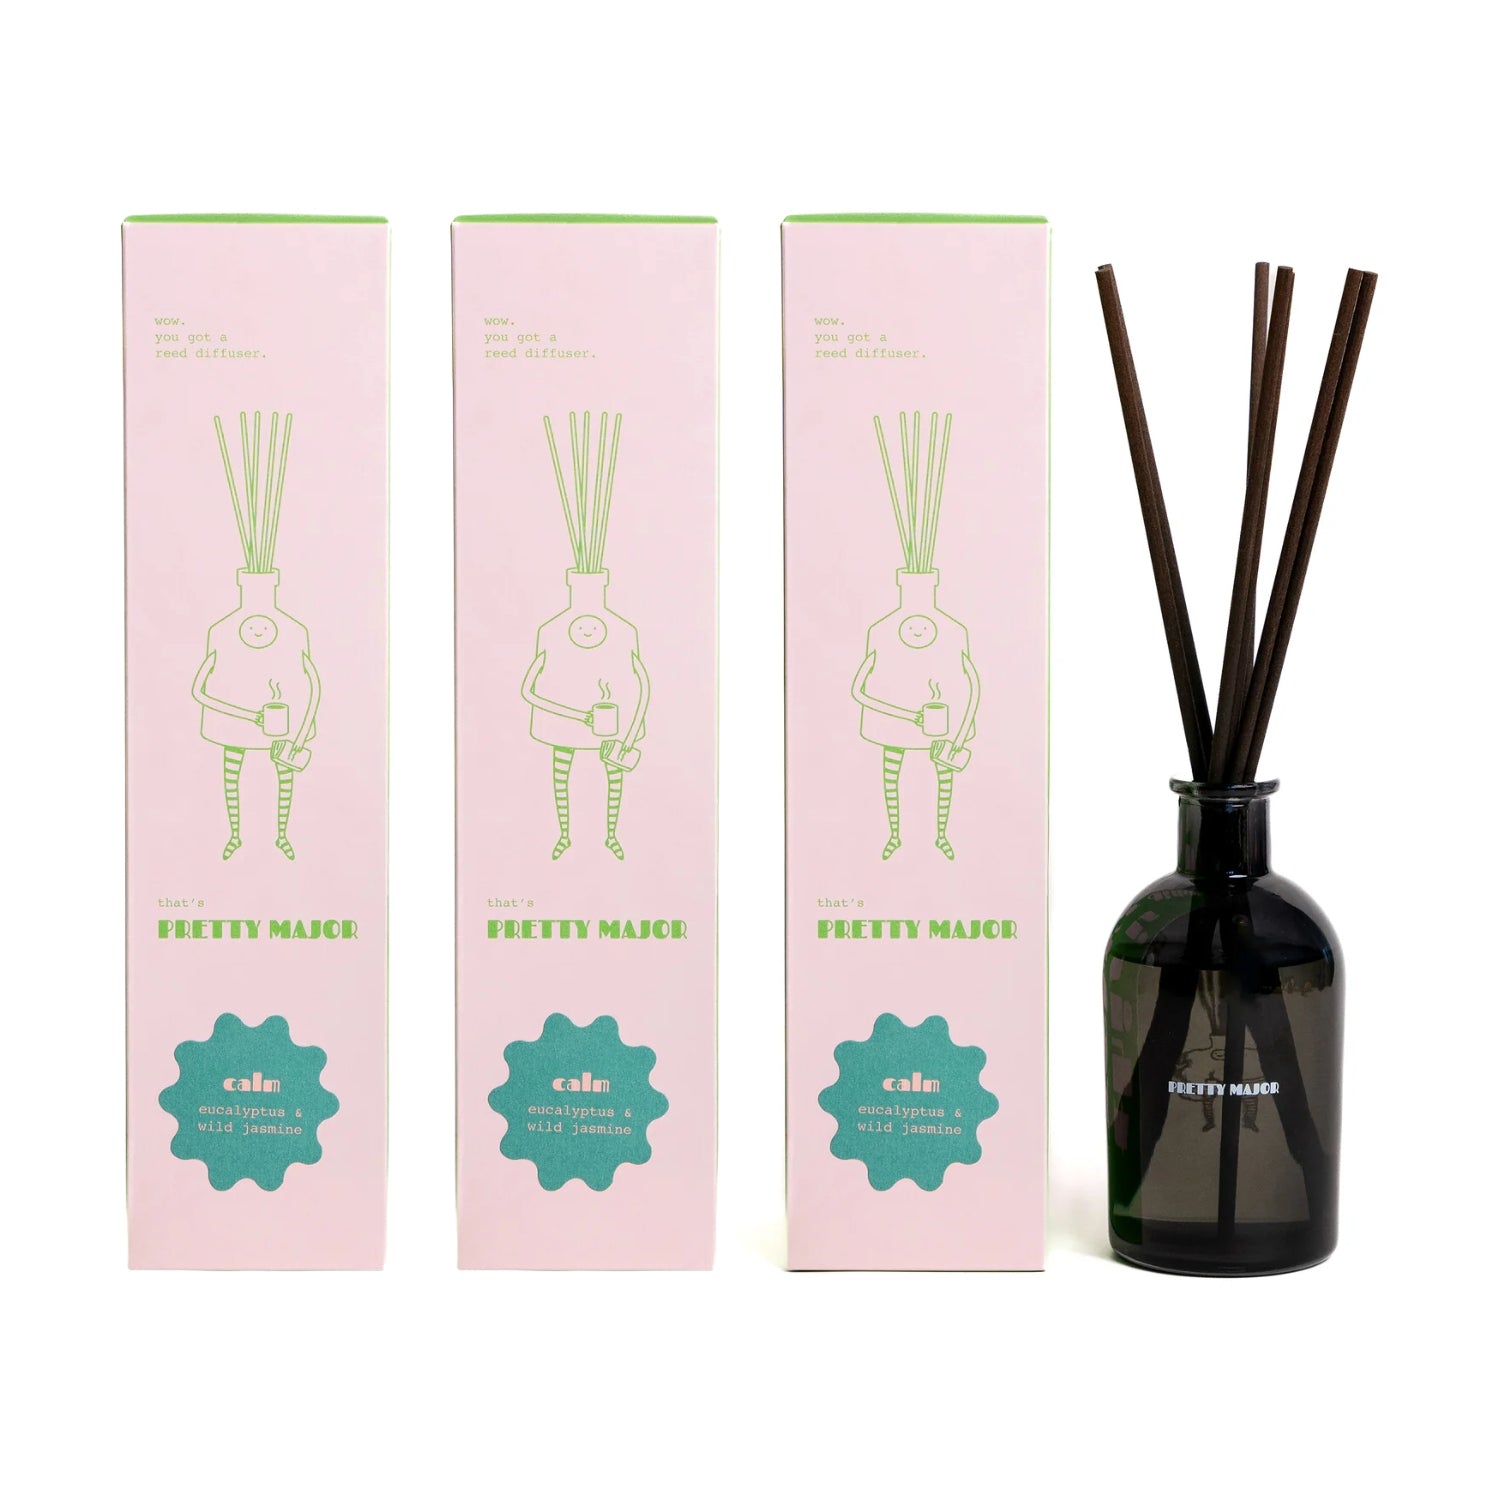 3 room reed diffuser subscription eucalyptus and wild jasminehome fragrance